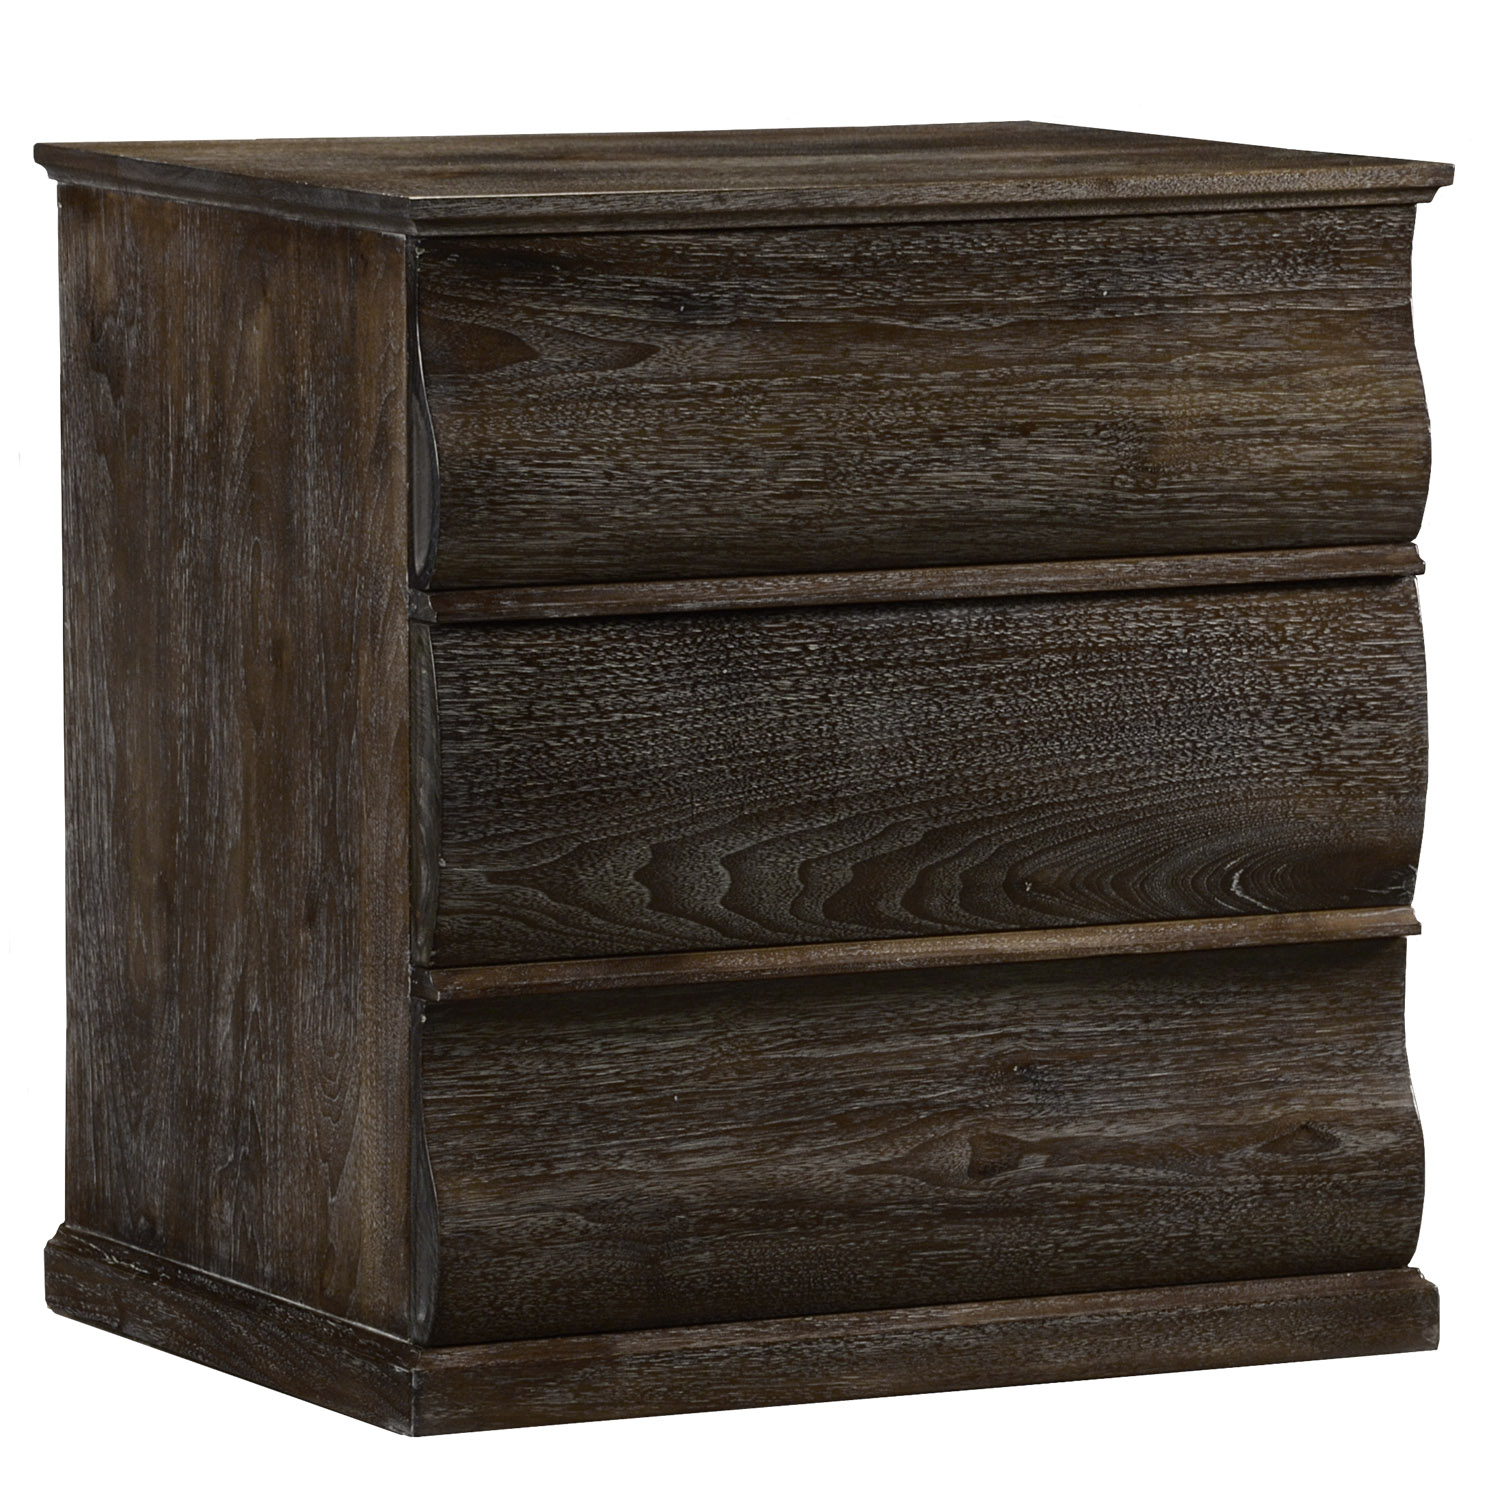 Averill transitional traditional curved front dresser chest with three drawers in a cerused walnut finish by Woodland furniture in Idaho Falls